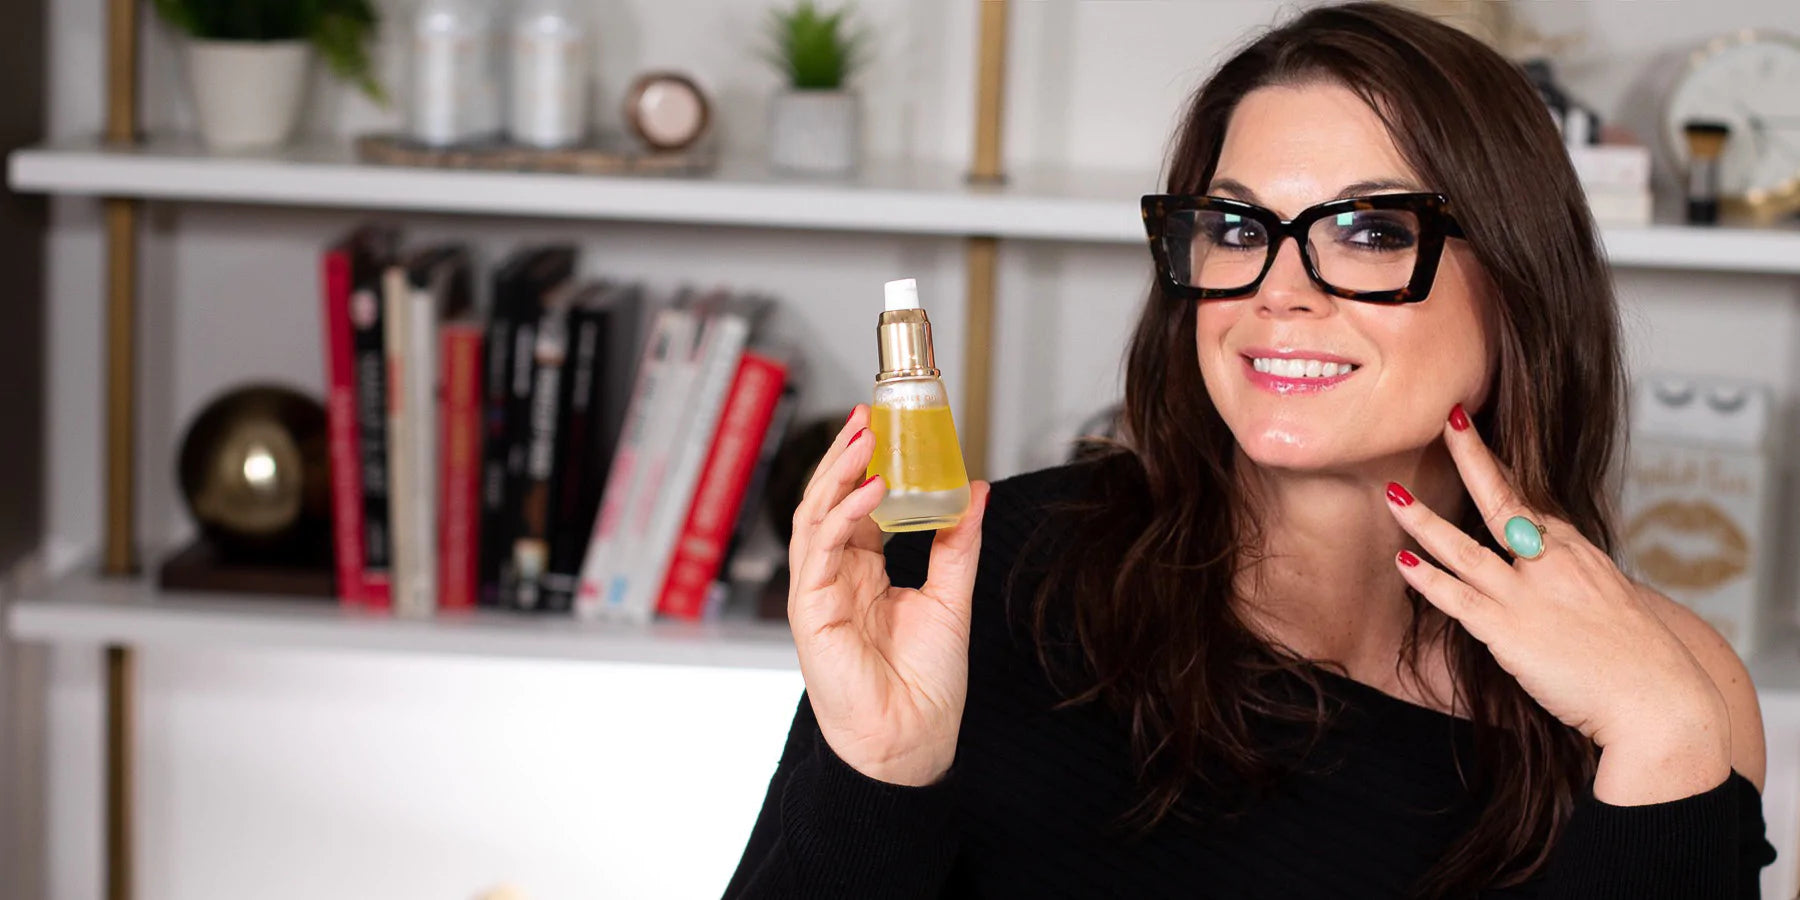 Sonia Roselli smiling to the camera showing off fabulous makeup and glowing skin while holding Water Oil facial serum and oil.